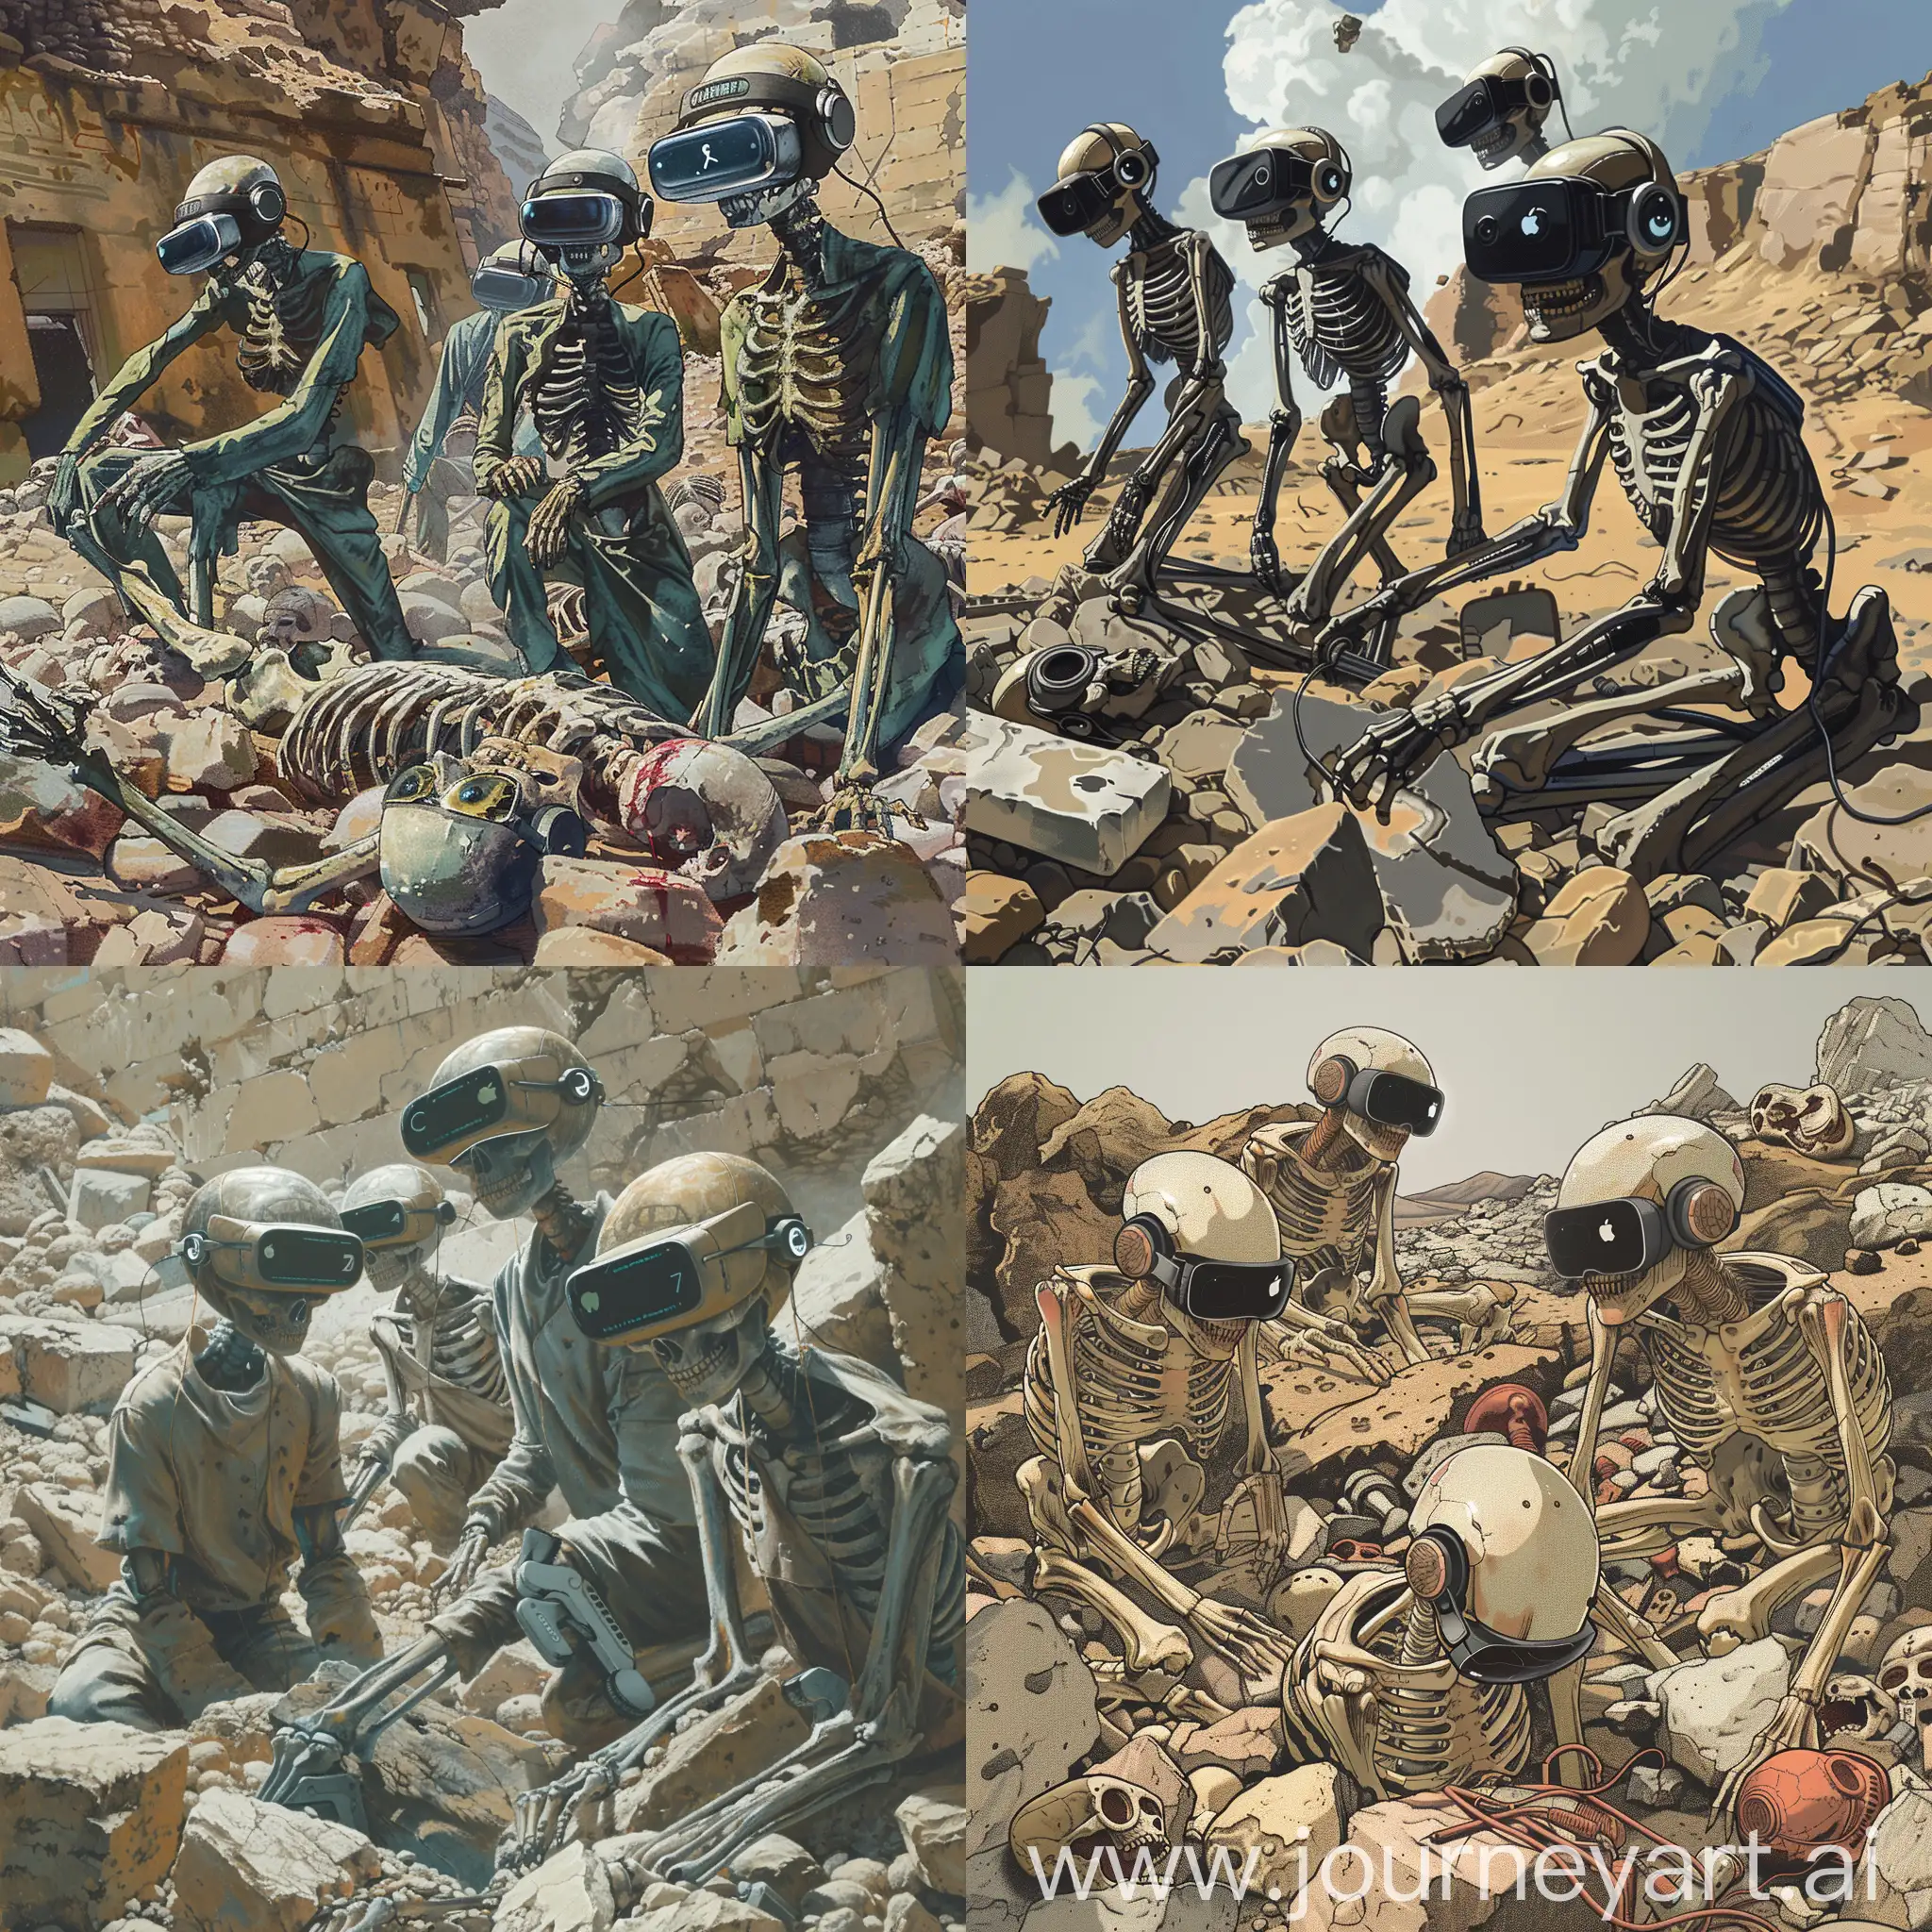 A group of alien archaeologists dig through the rubble of human civilization. One alien archaeologist finds skeletons with Apple Vision Pro headsets still on their heads.